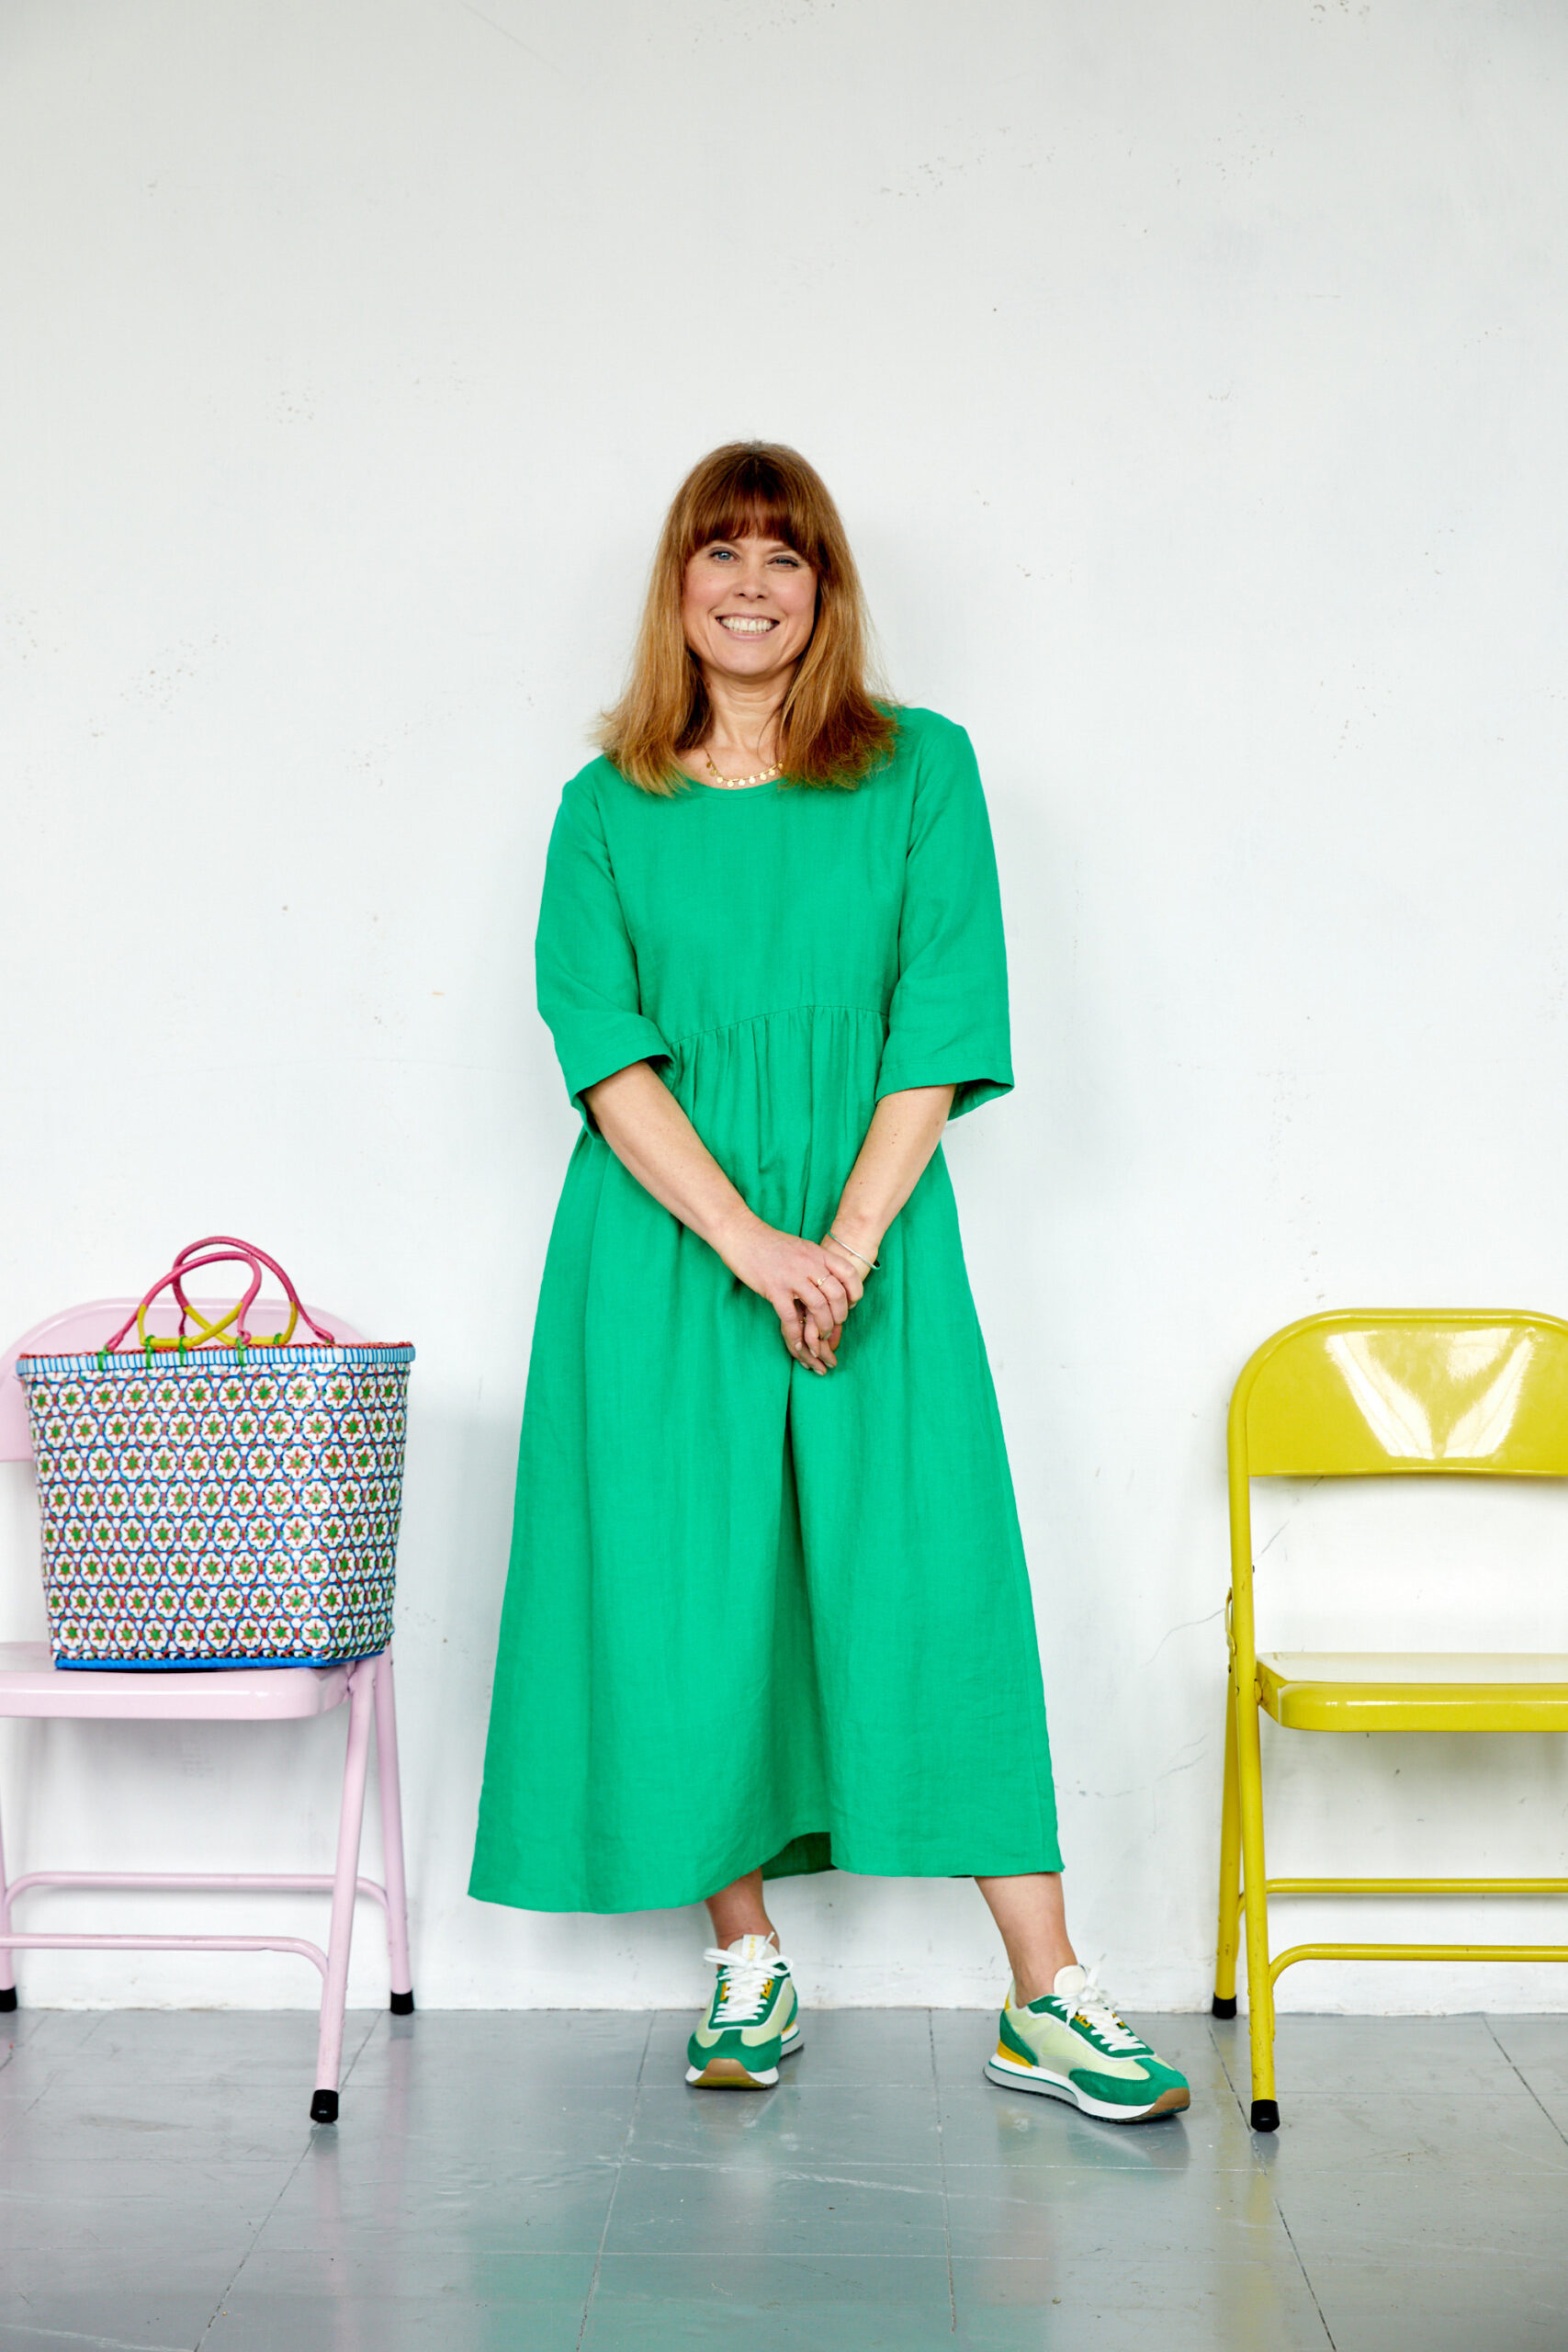 Summer dresses, sustainability & celebrating small business with fashion  designer Justine Tabak — That's Not My Age